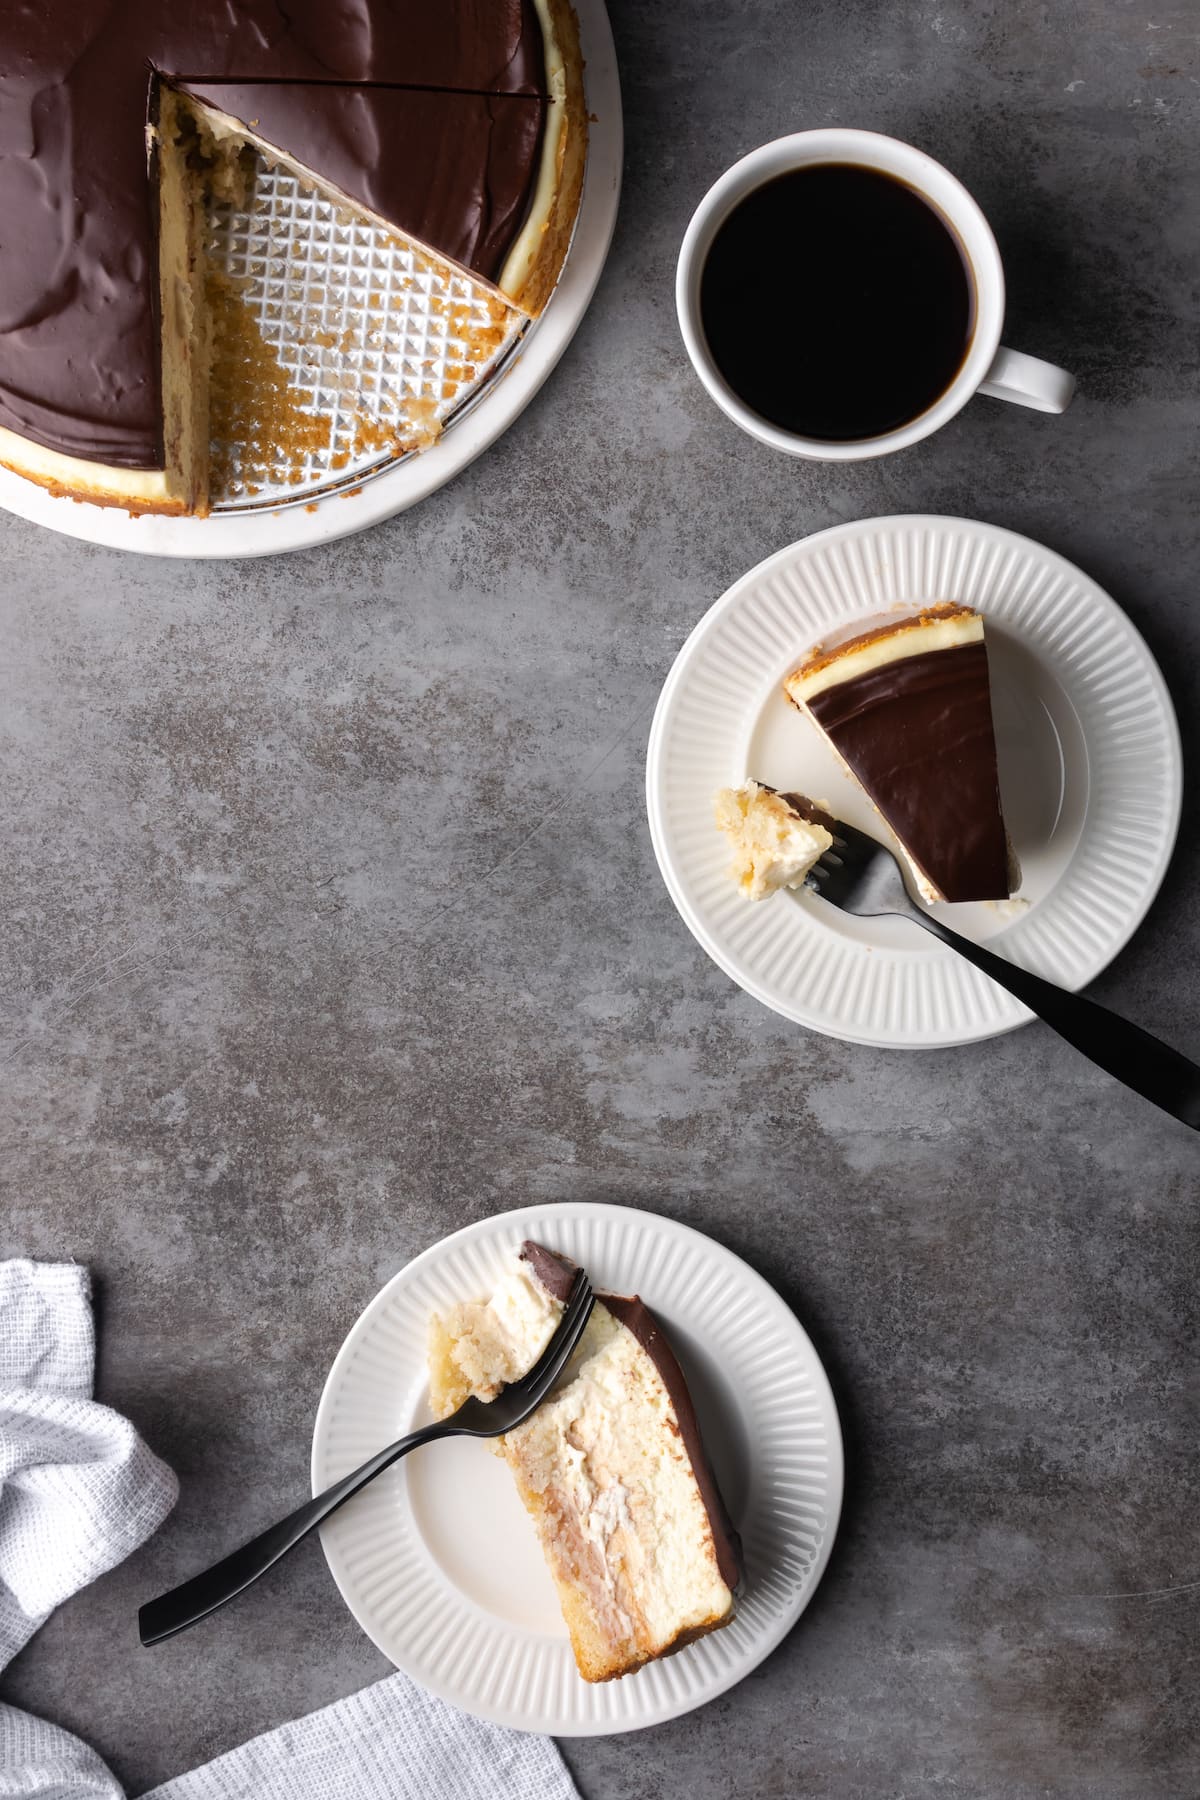 A table spread with Boston Cream Pie cheesecake slices on plates, next to a cup of coffee and the remaining cake.